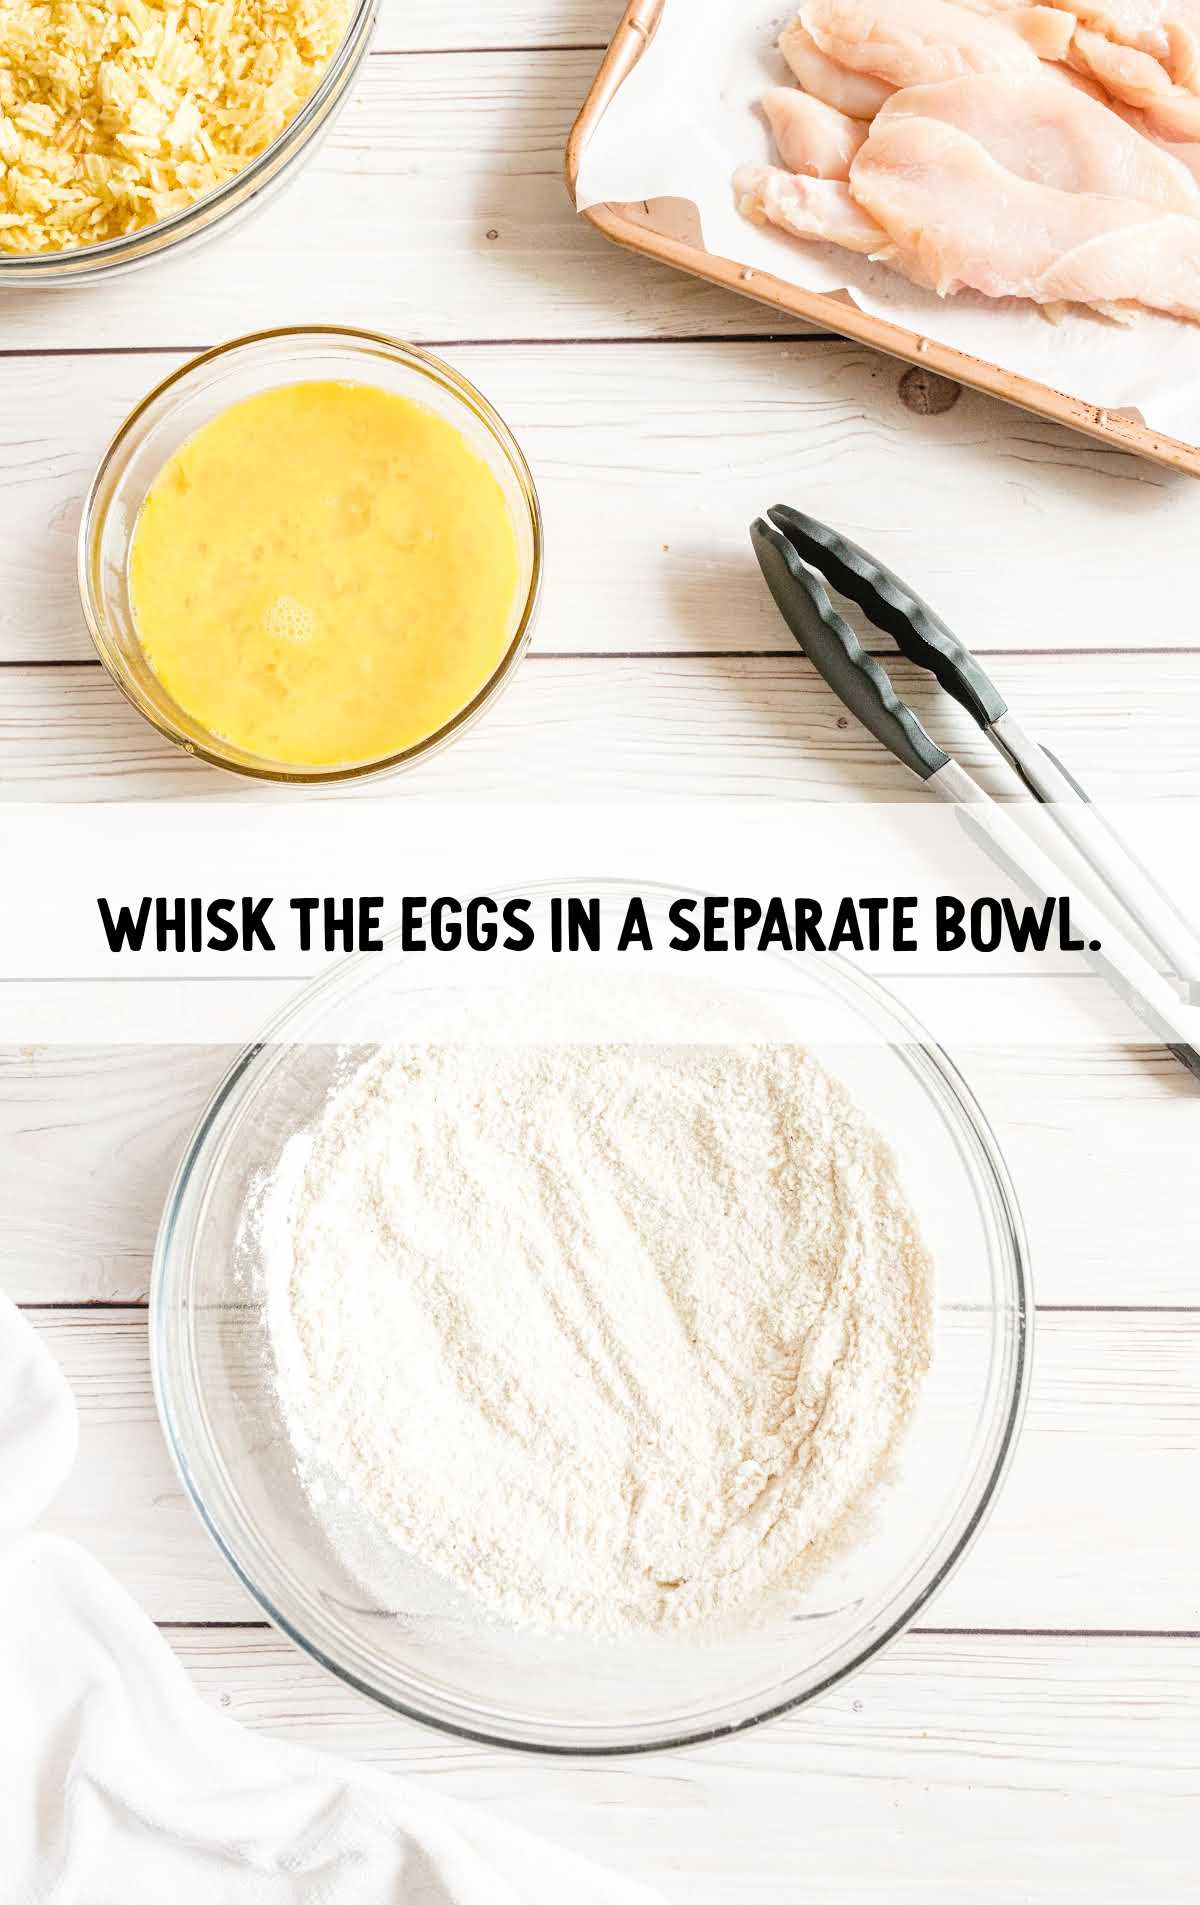 eggs whisked into a separate bowl